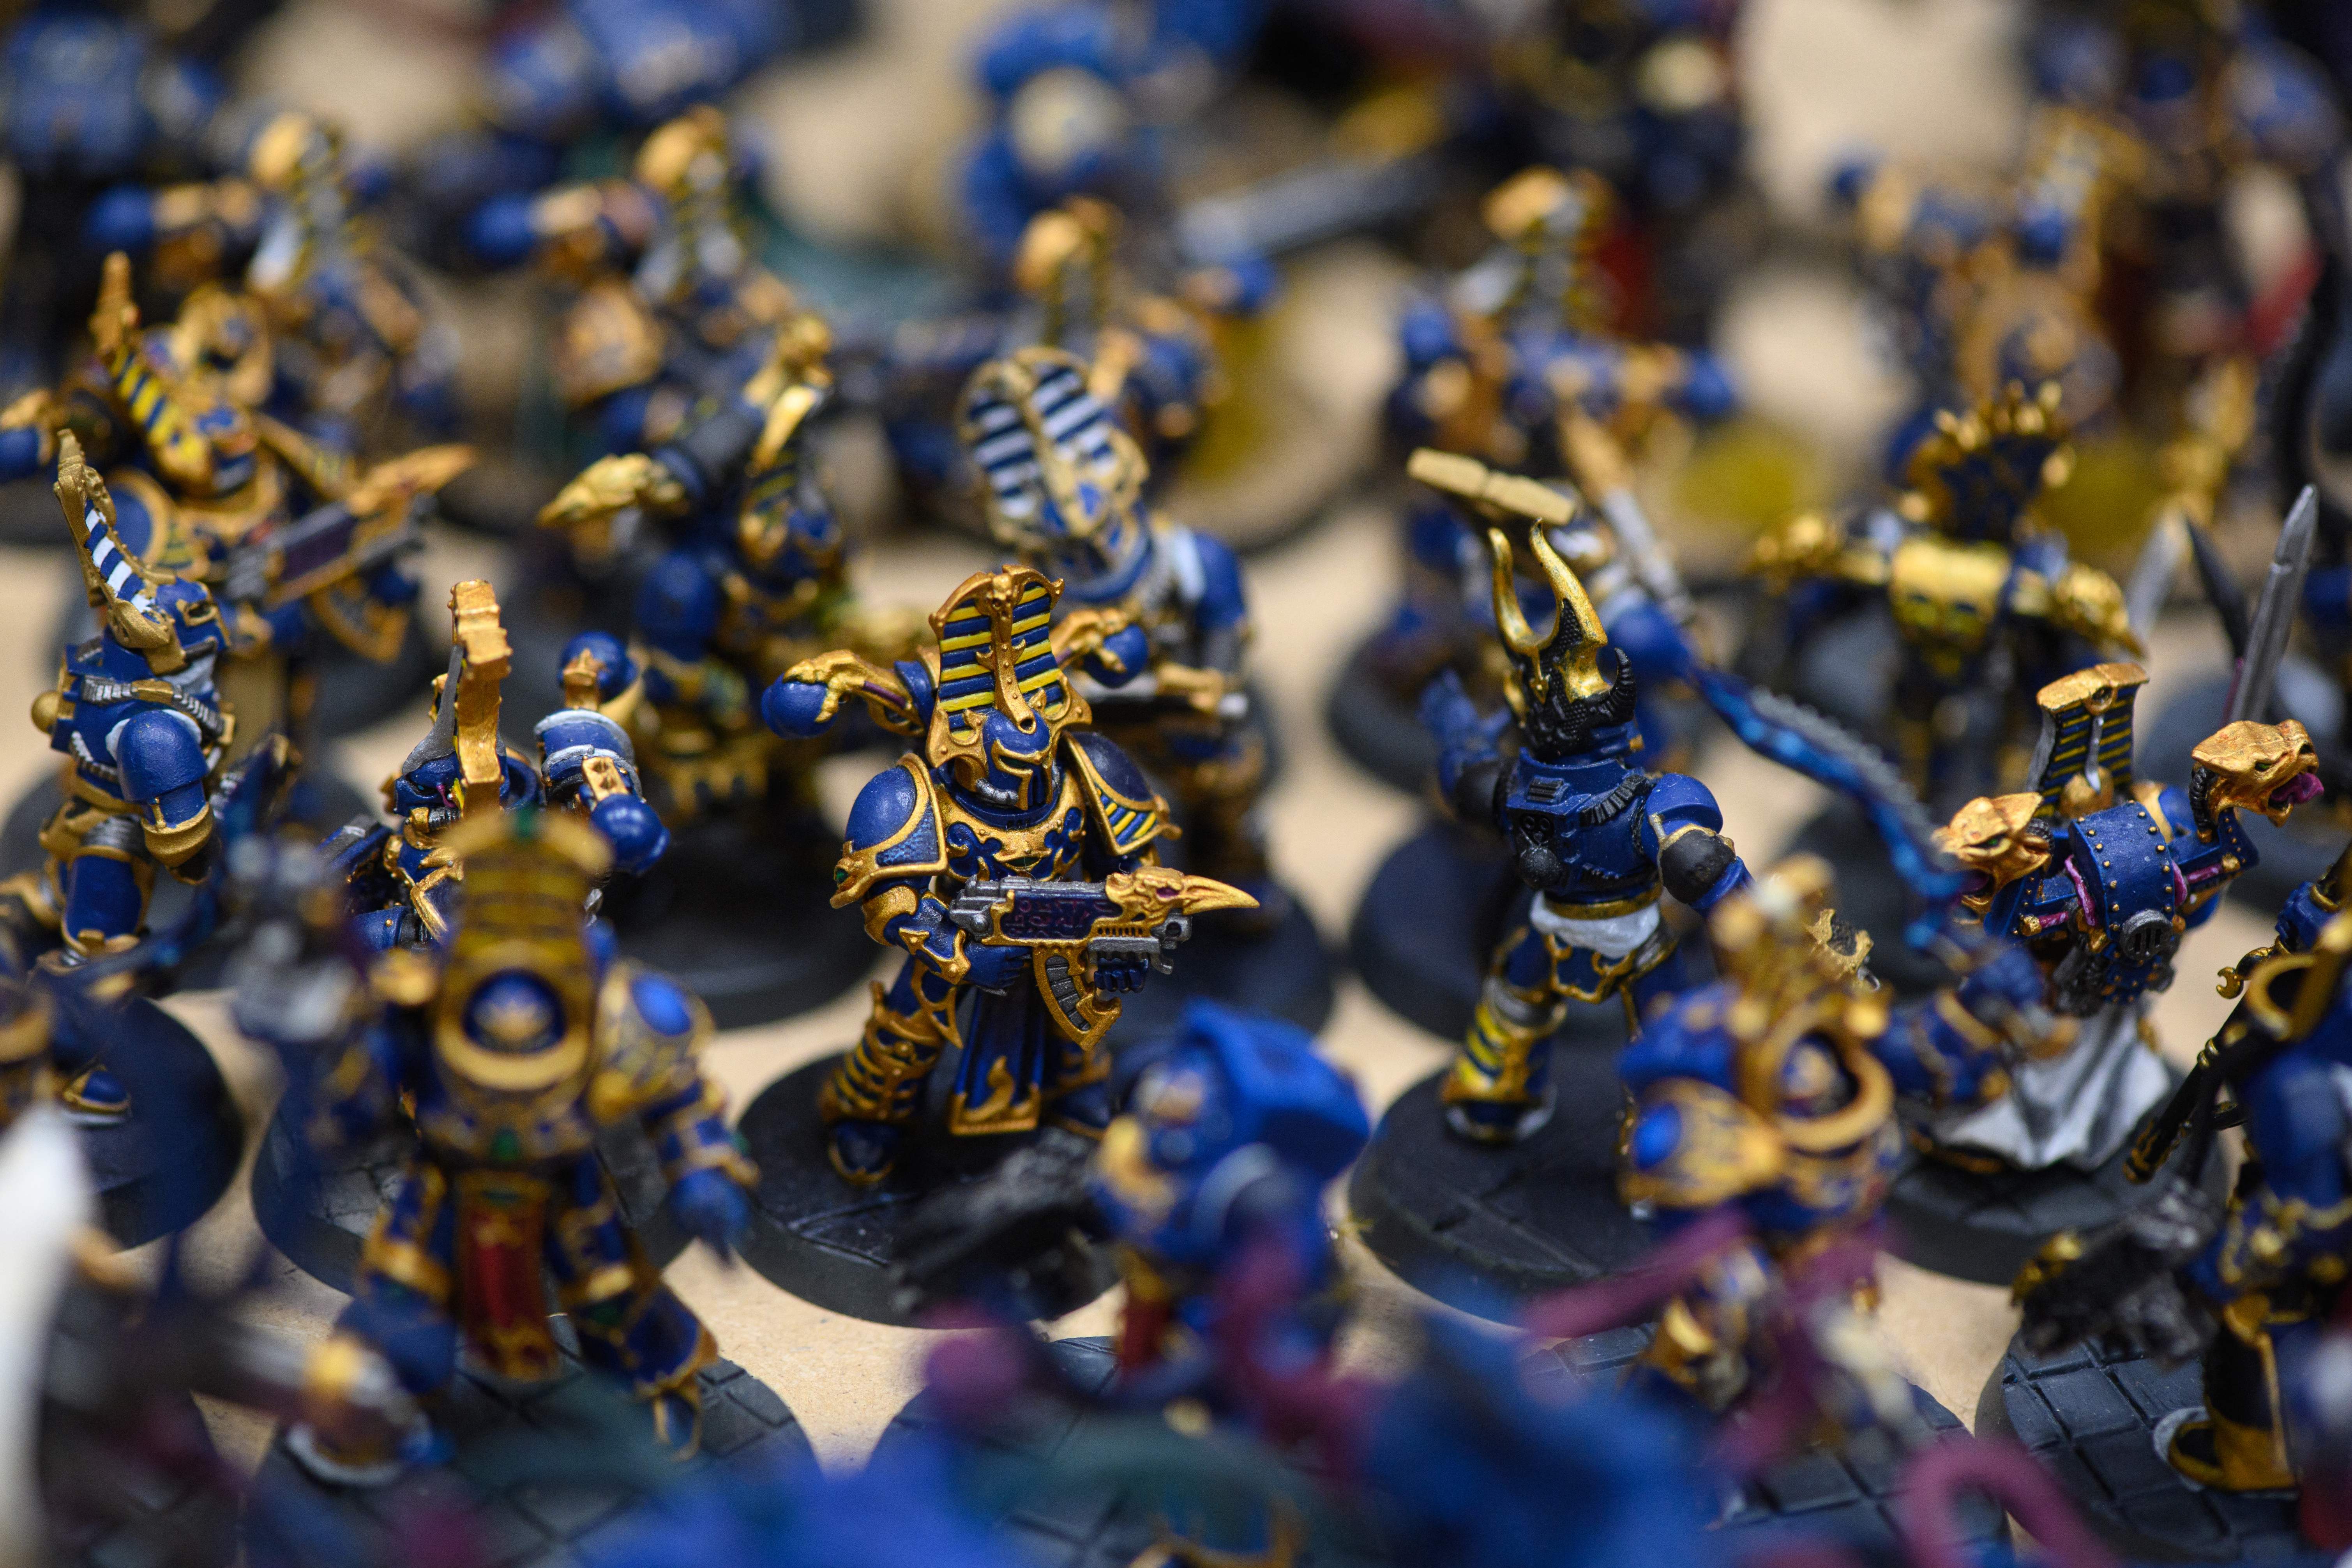 signs deal to bring Warhammer to screens